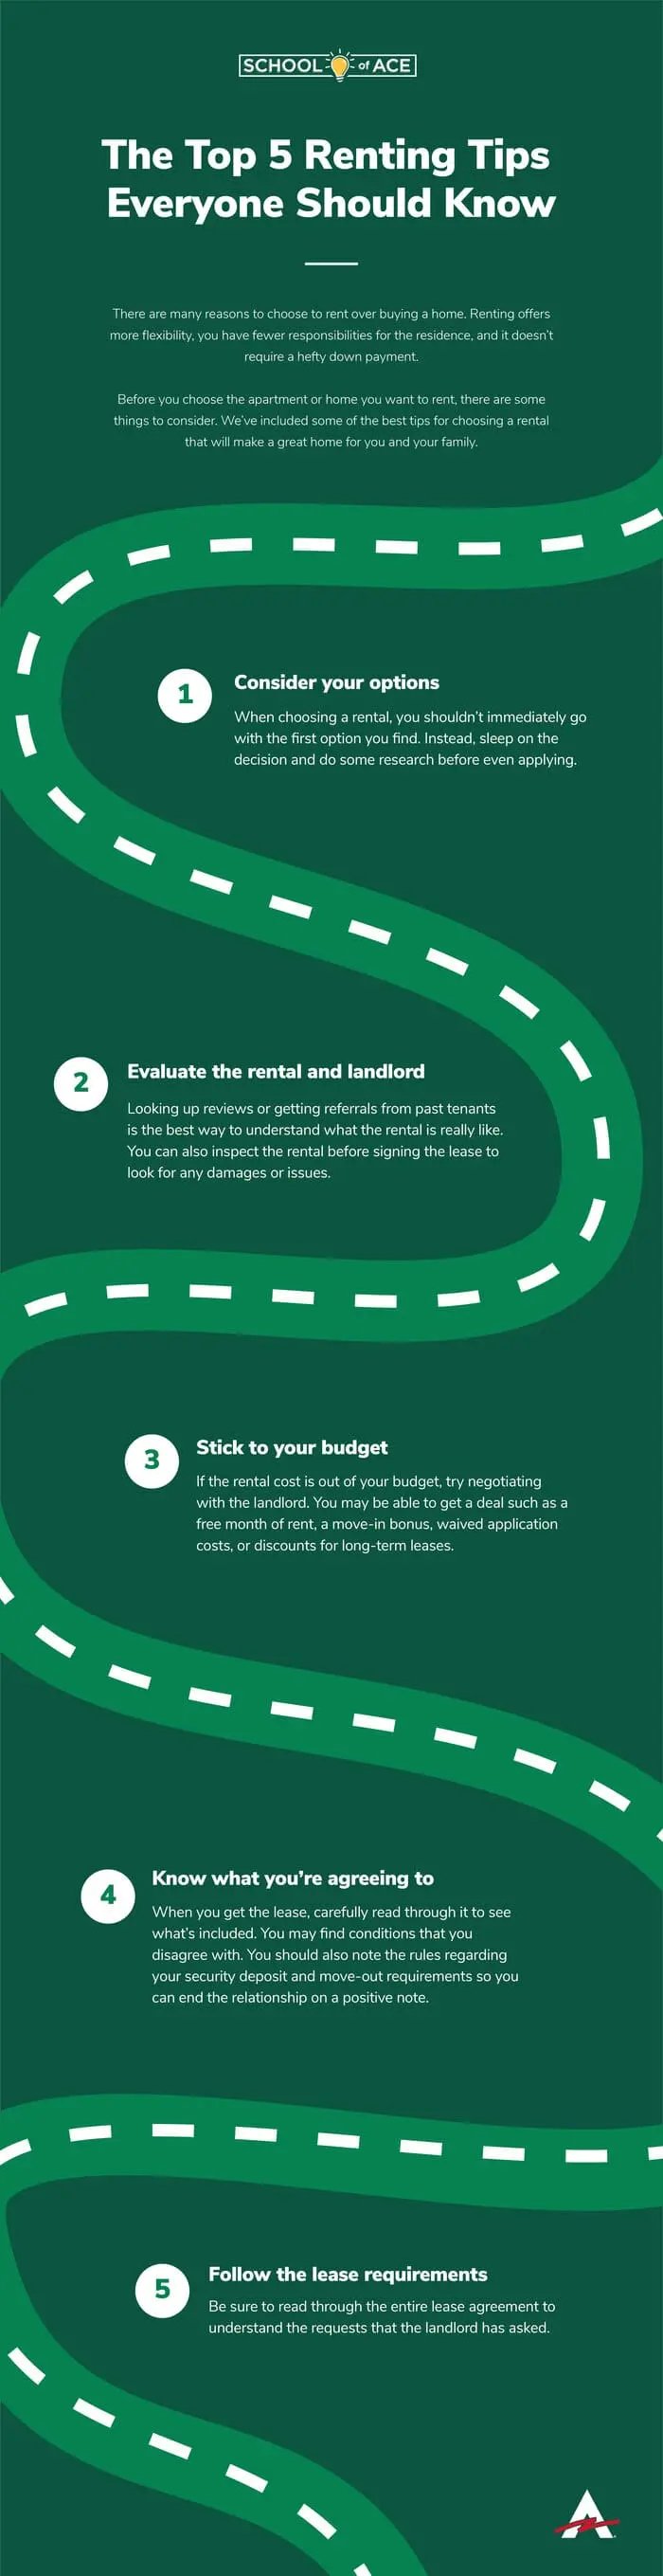 Renting Tips infographic